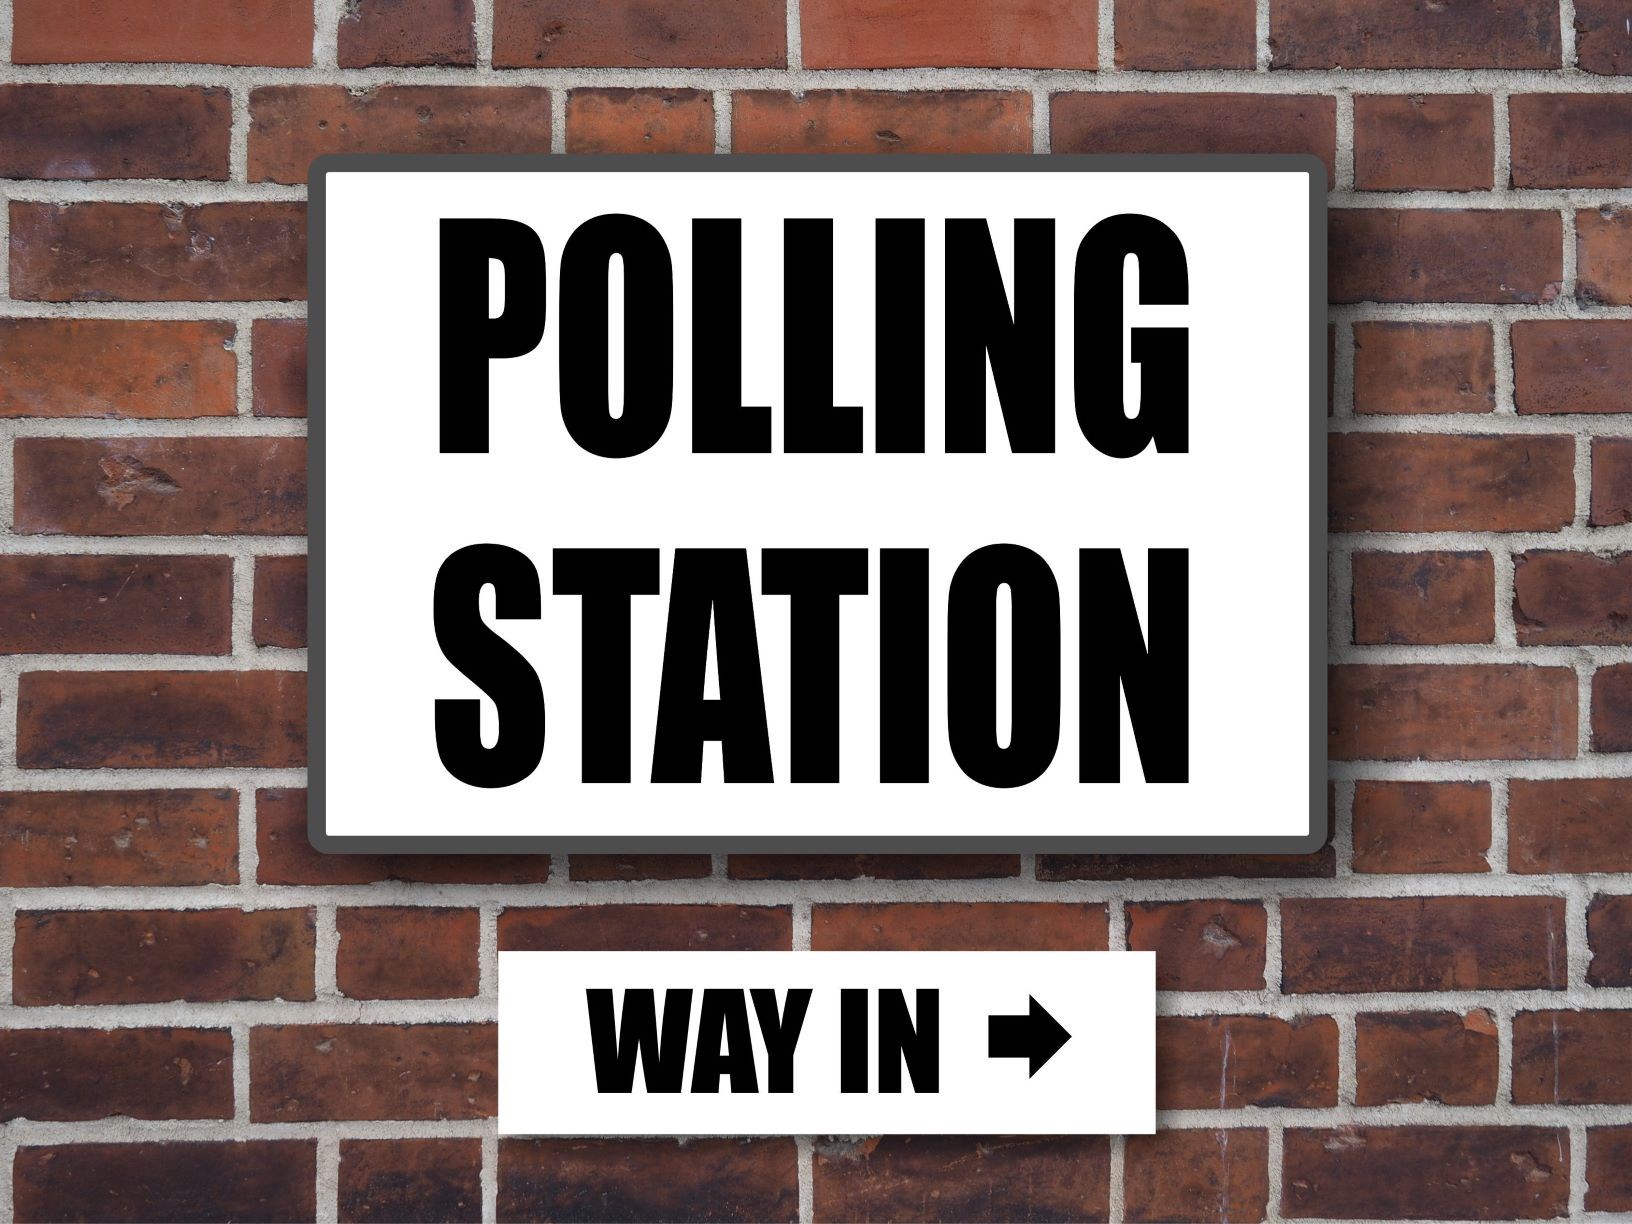 polling station sign attached to wall